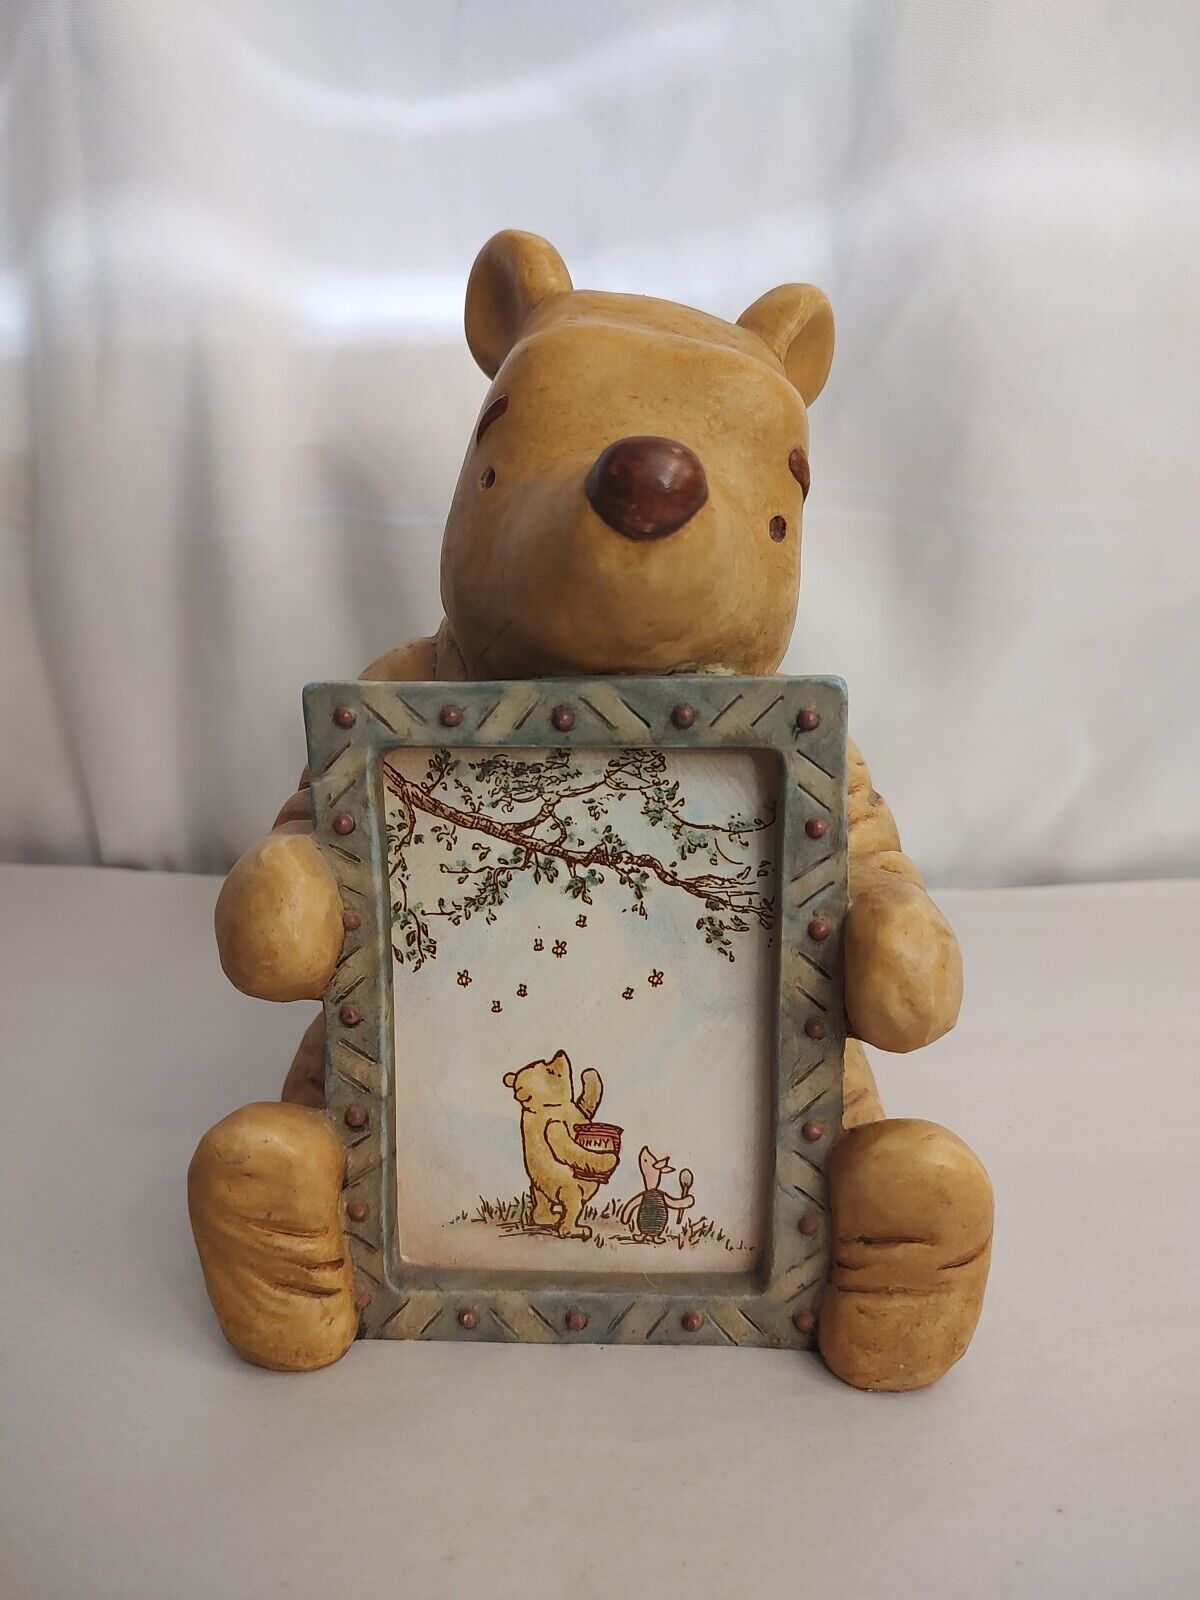 Vintage Disney Classic “Winnie The Pooh” Sitting Picture Frame By Charpente